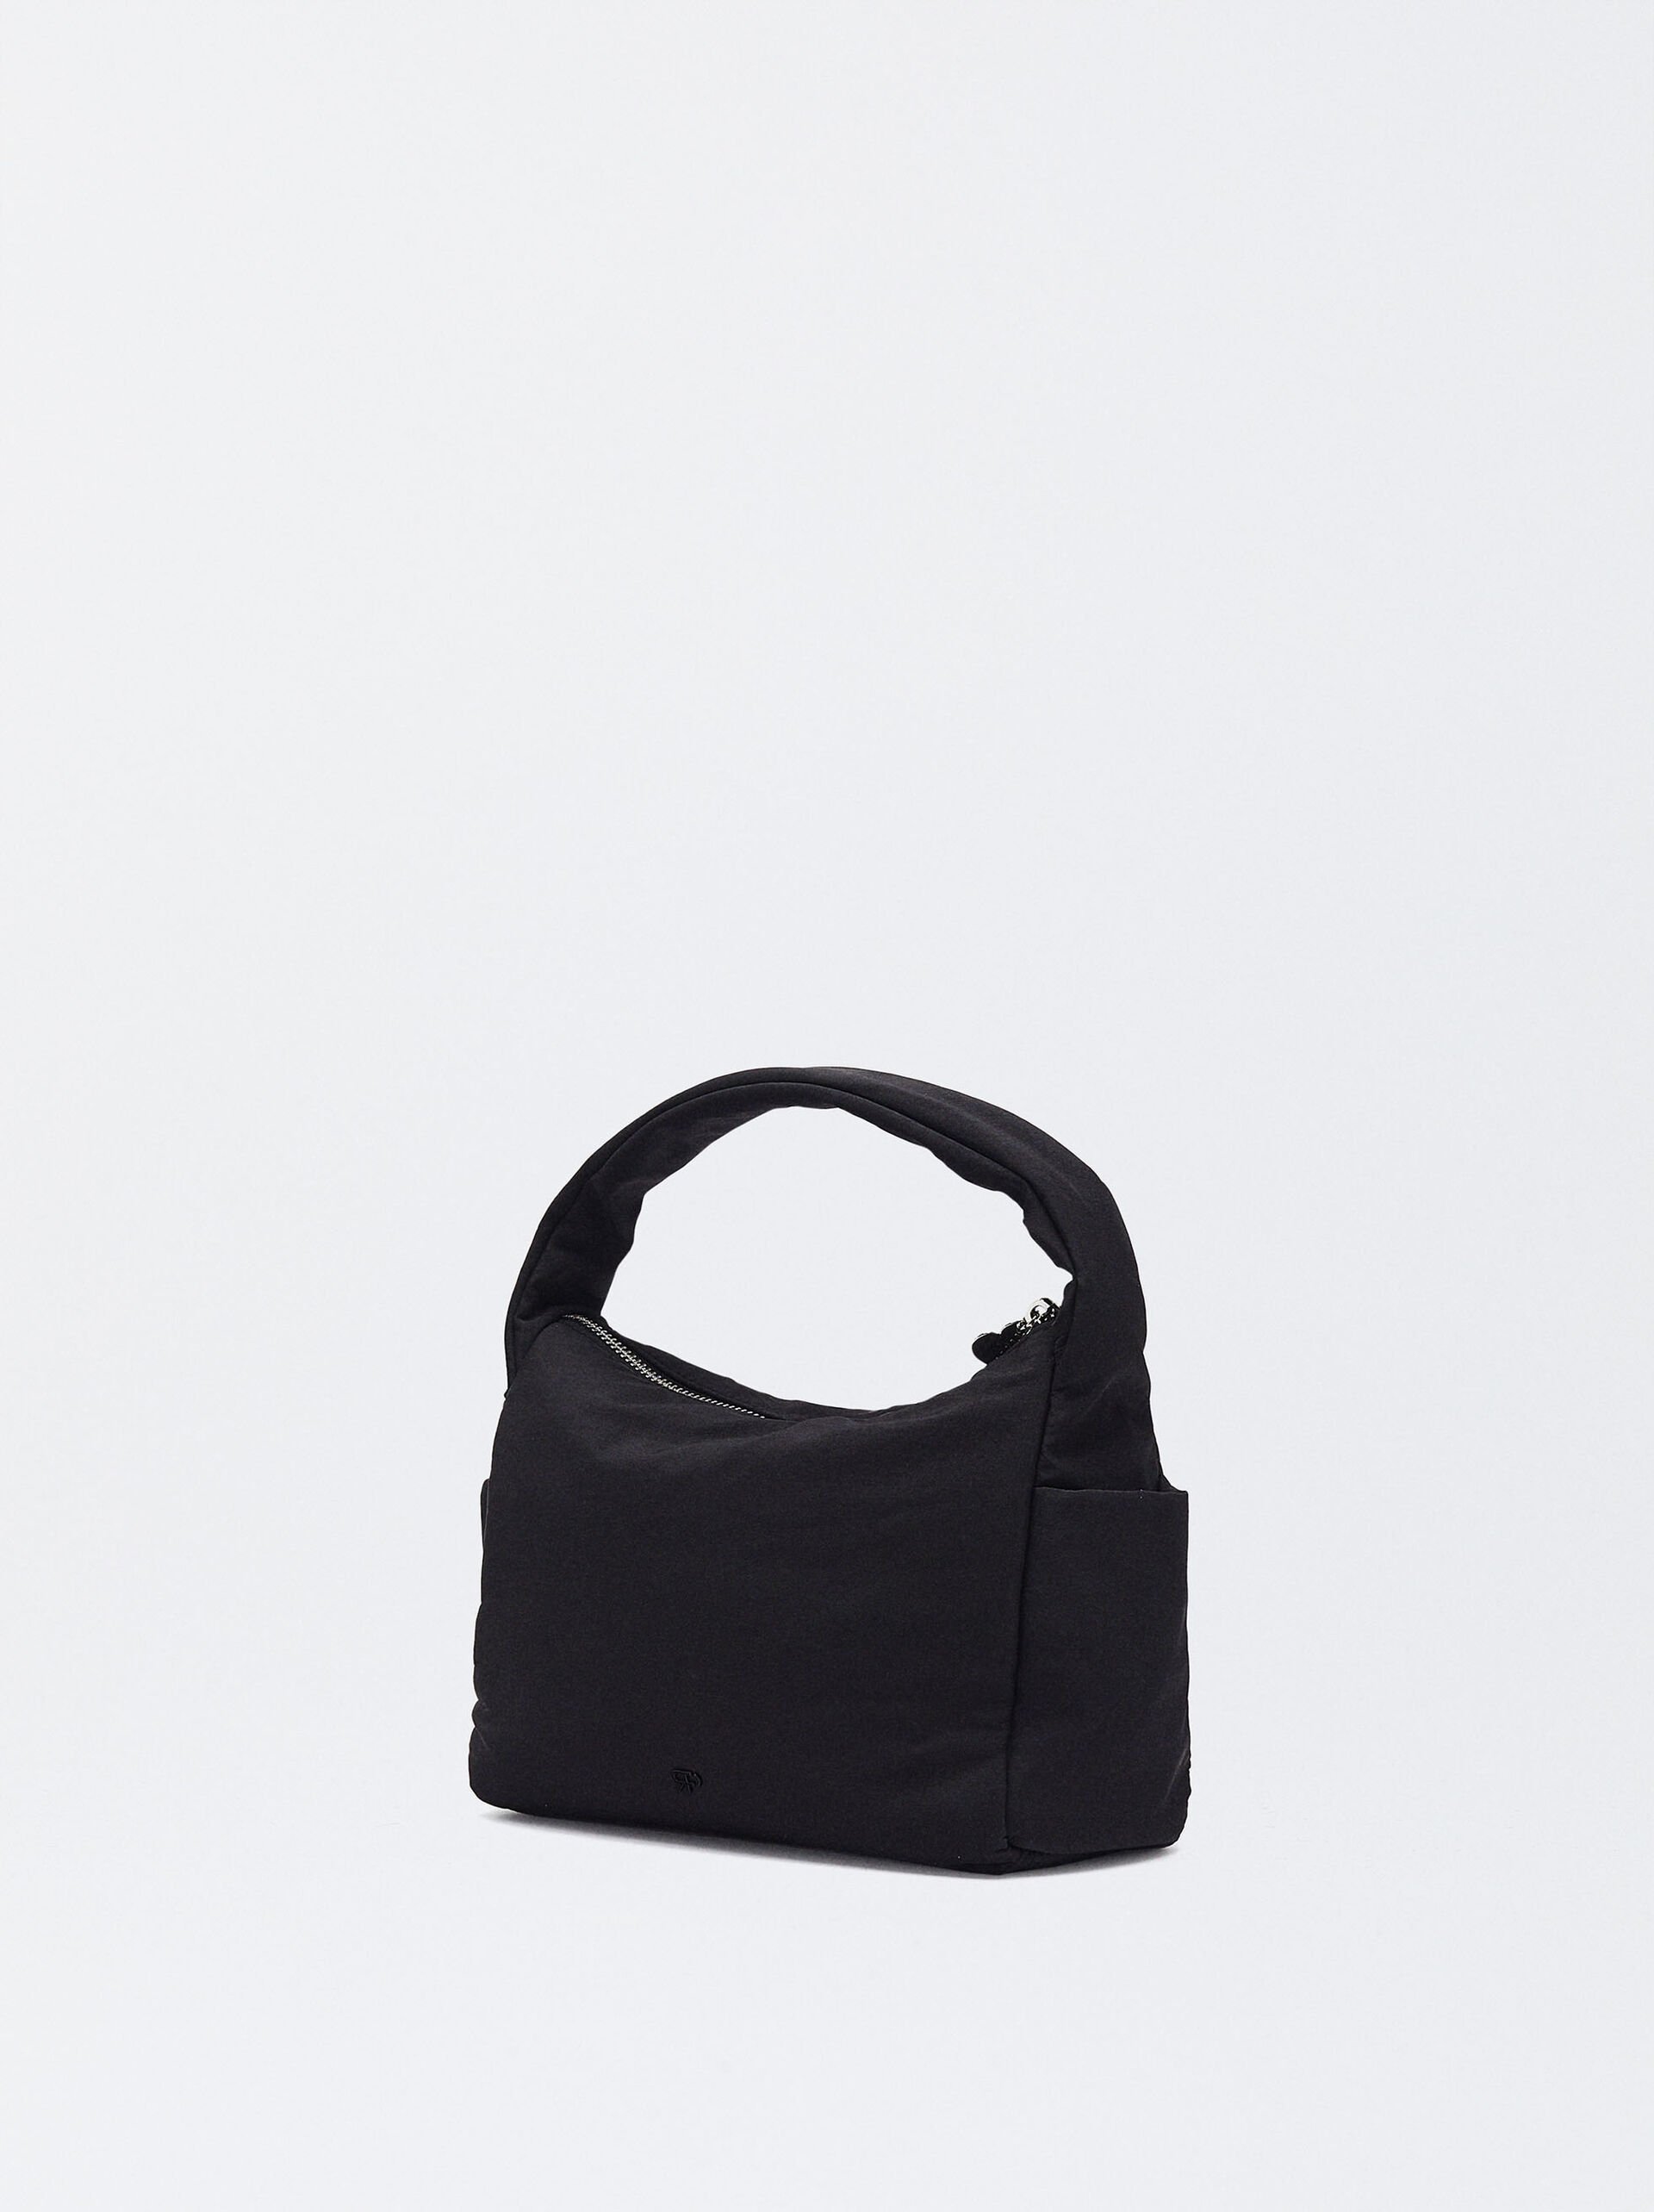 Online Exclusive - Borsa A Spalla In Nylon Love image number 3.0